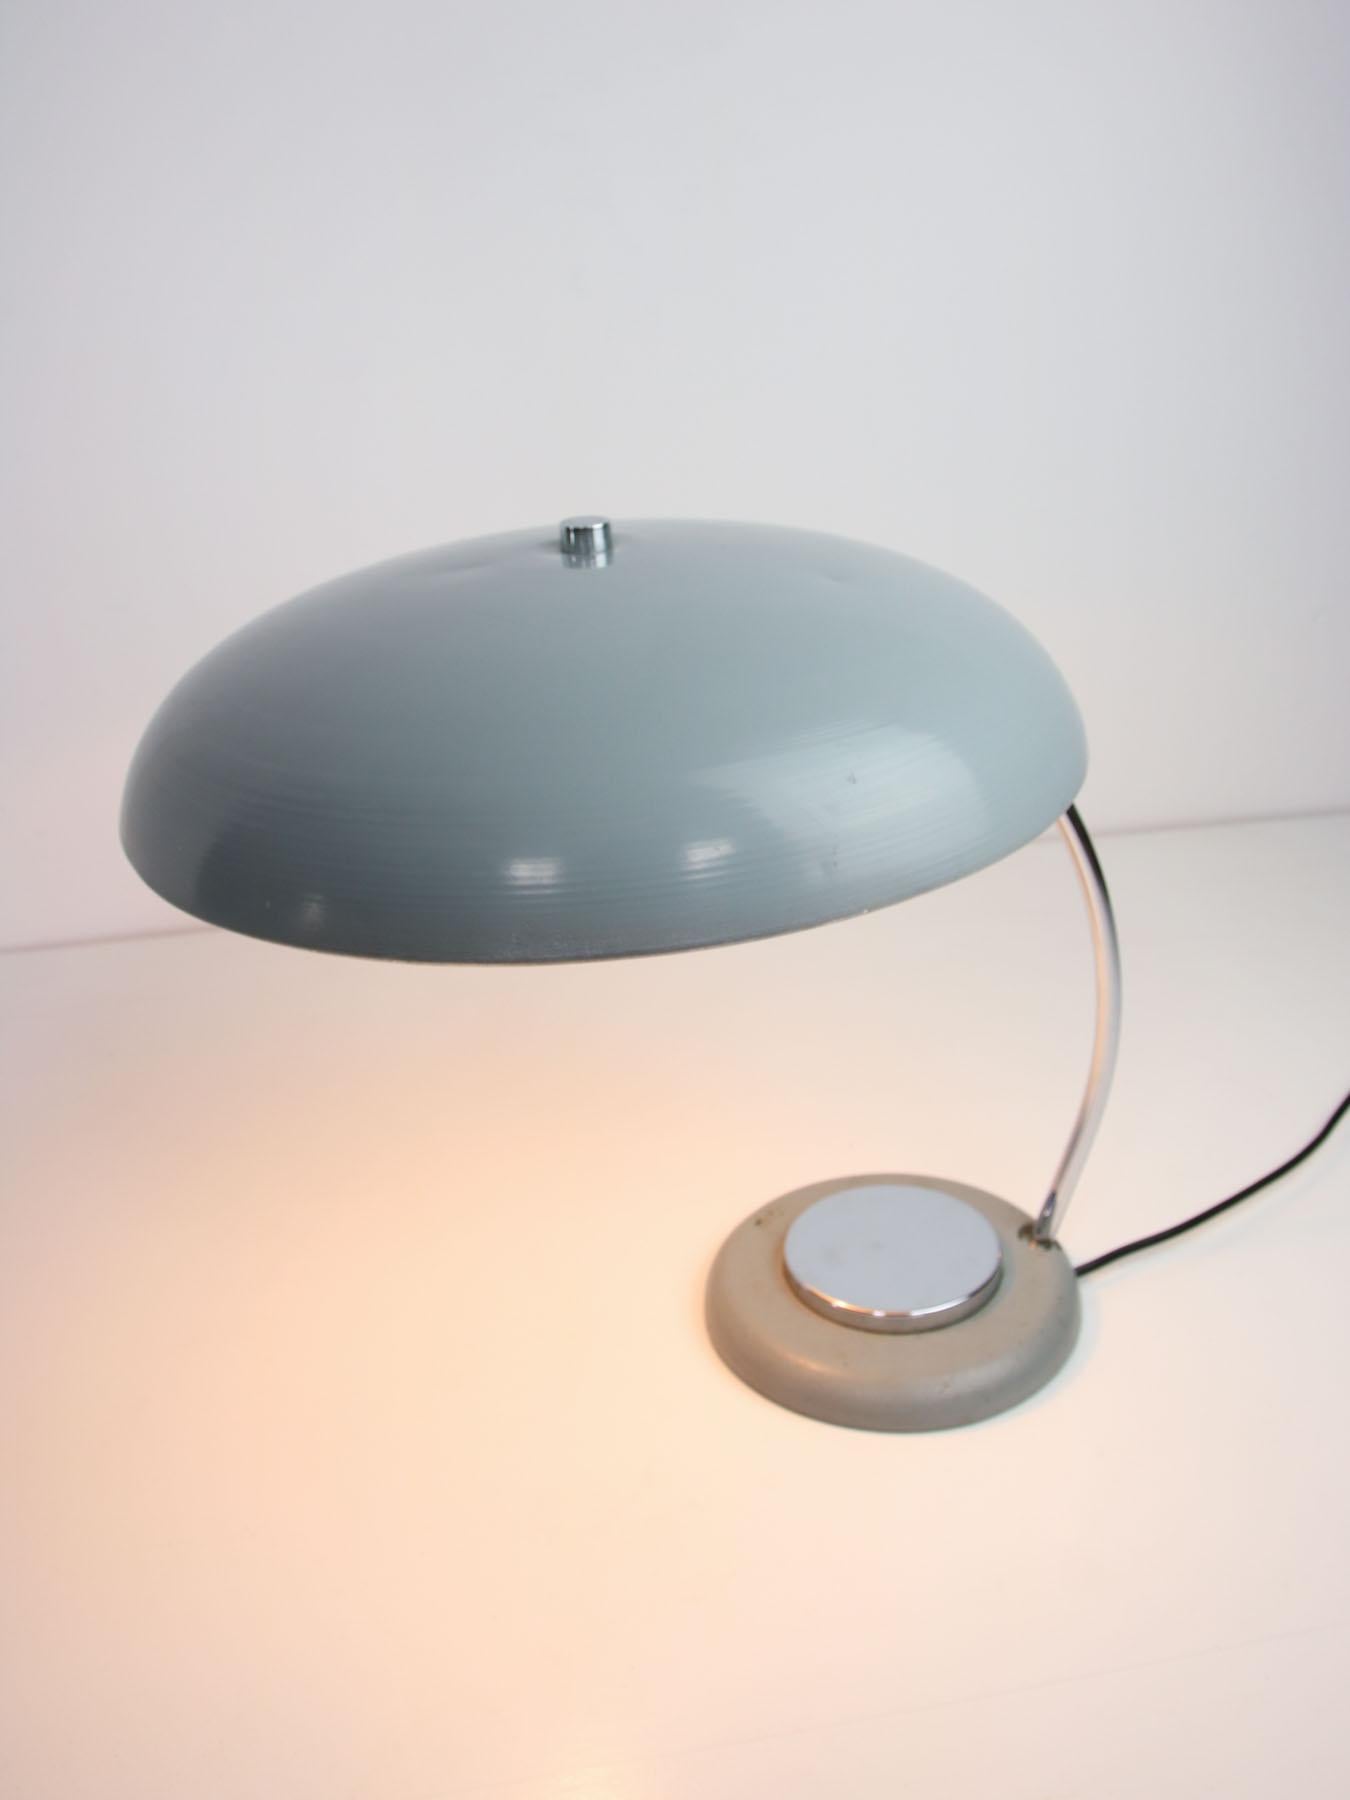 Early 20th Century Bauhaus Saucer Table Lamp with Big Button For Sale